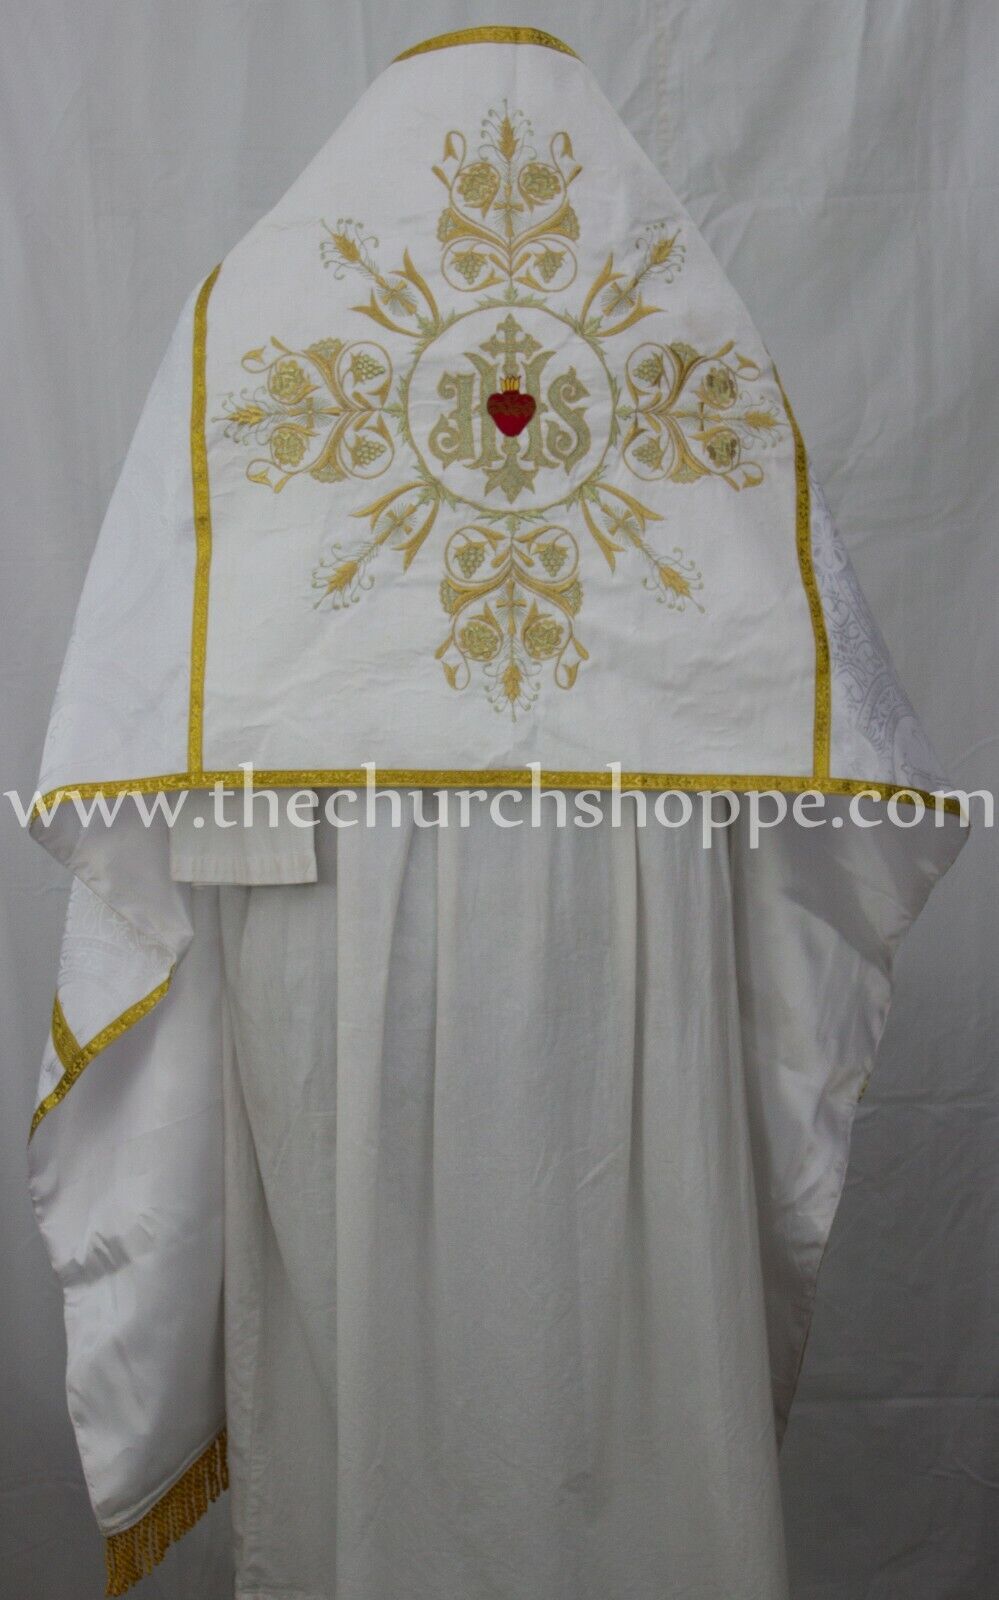 White Humeral Veil with IHS embroidery,voile huméral,velo omerale